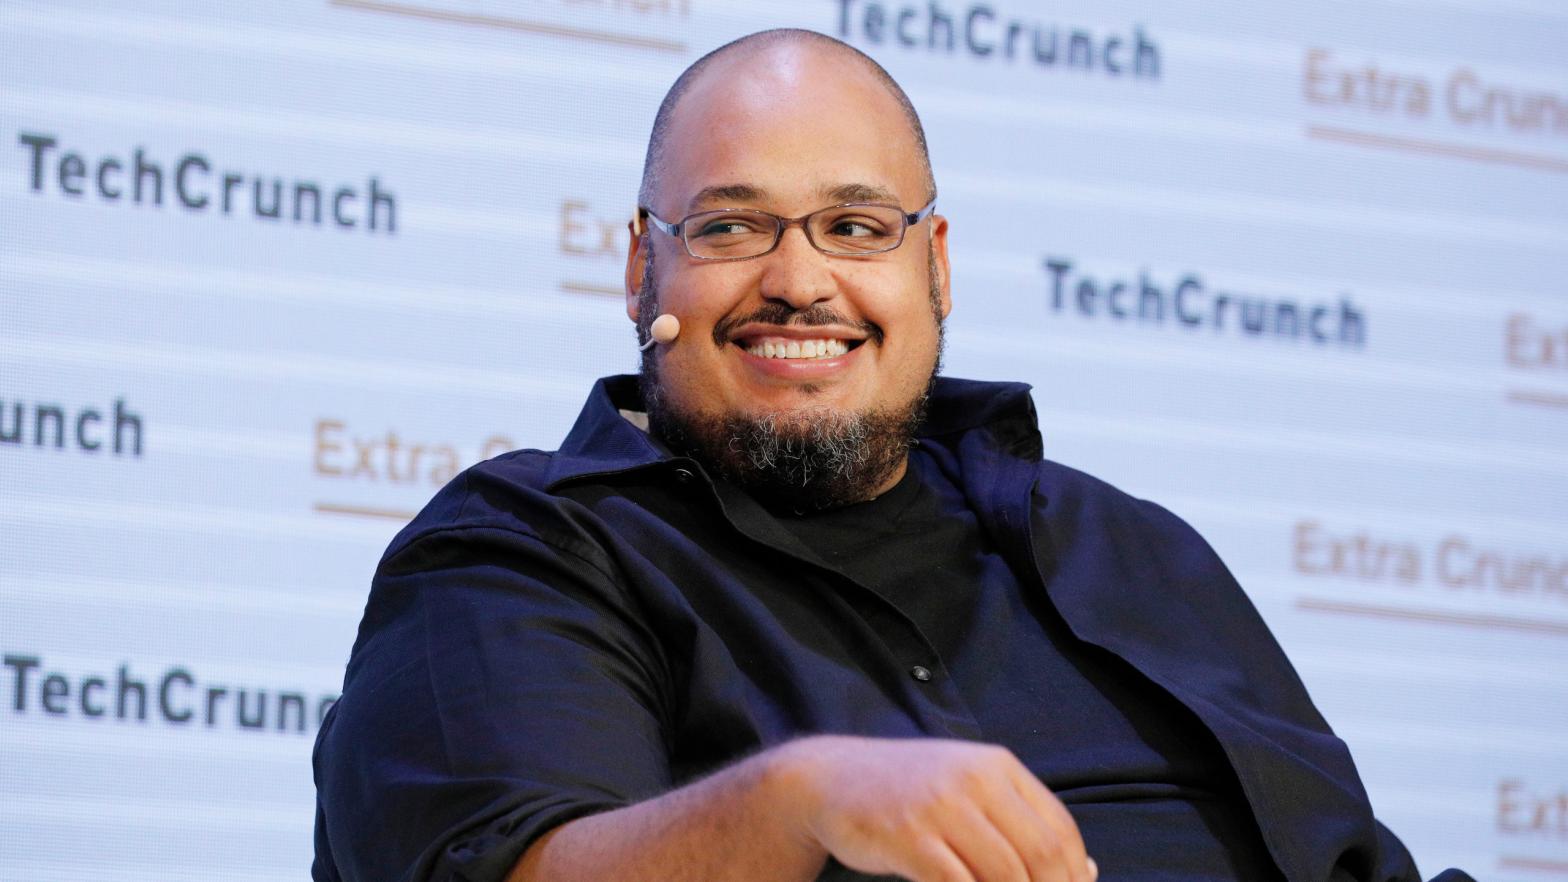 Michael Seibel at a TechCrunch event. (Photo: Getty Images)